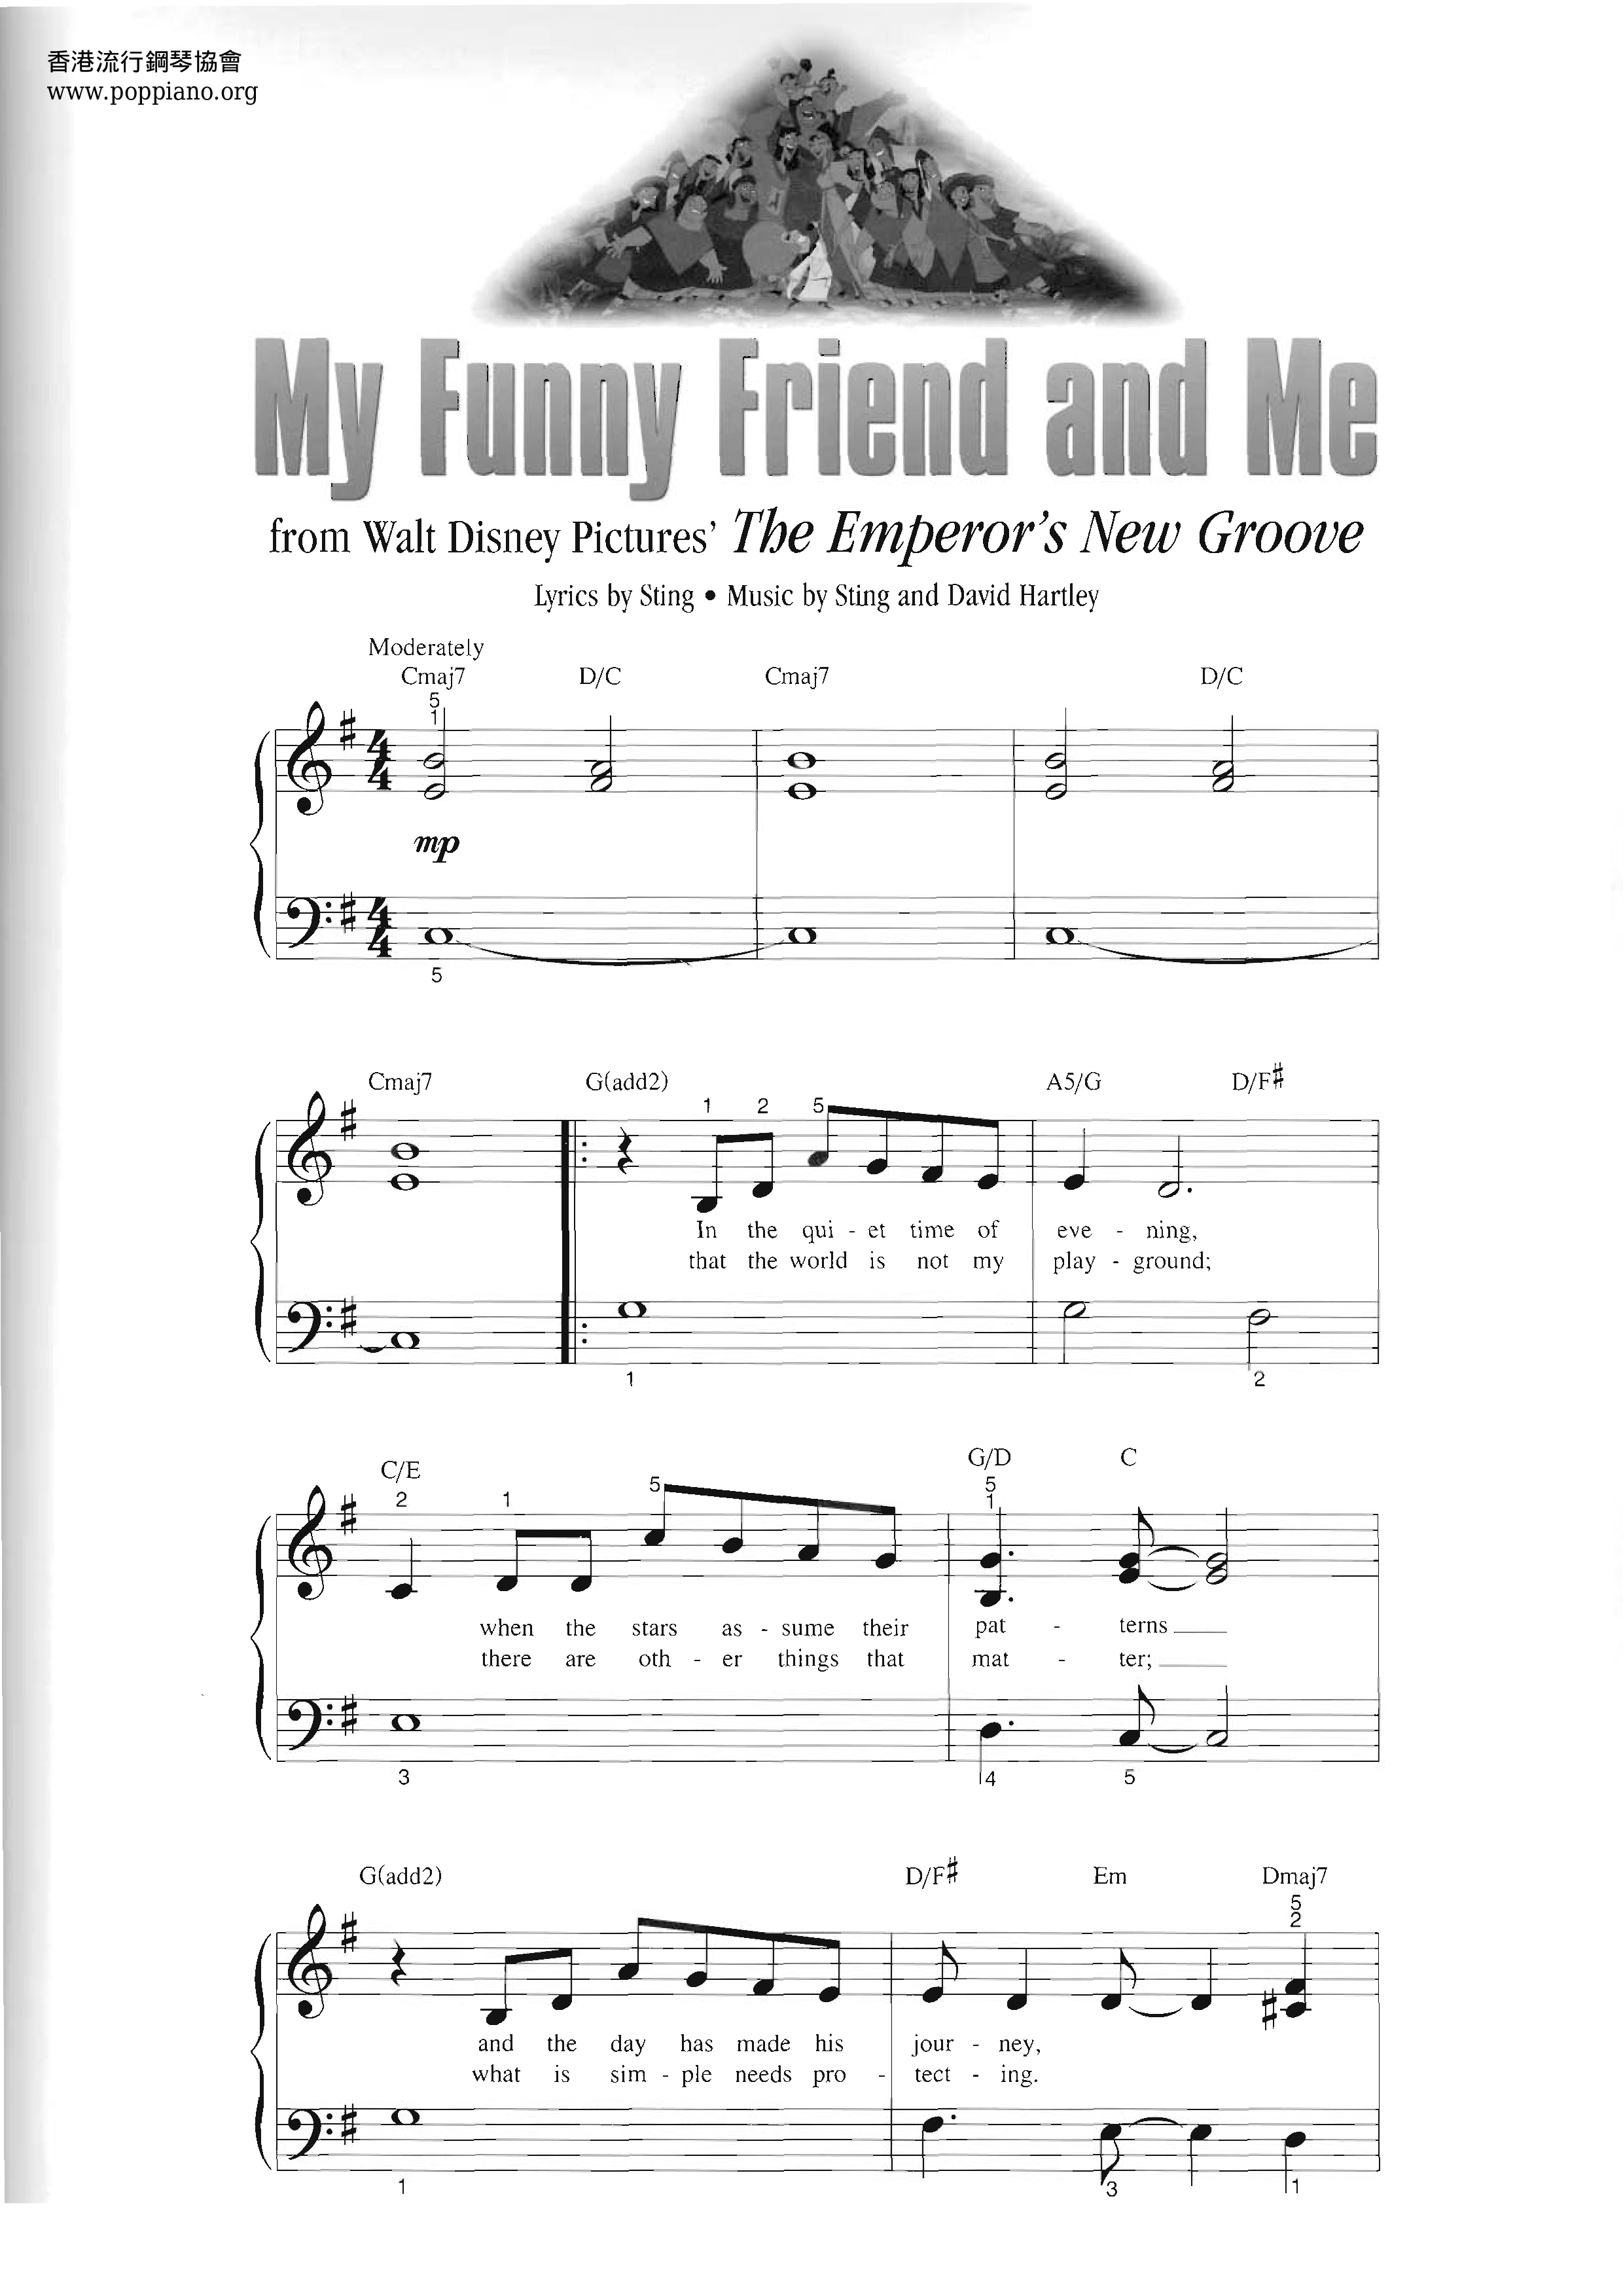 The Emperor's New Groove - My Funny Friend And Me Score